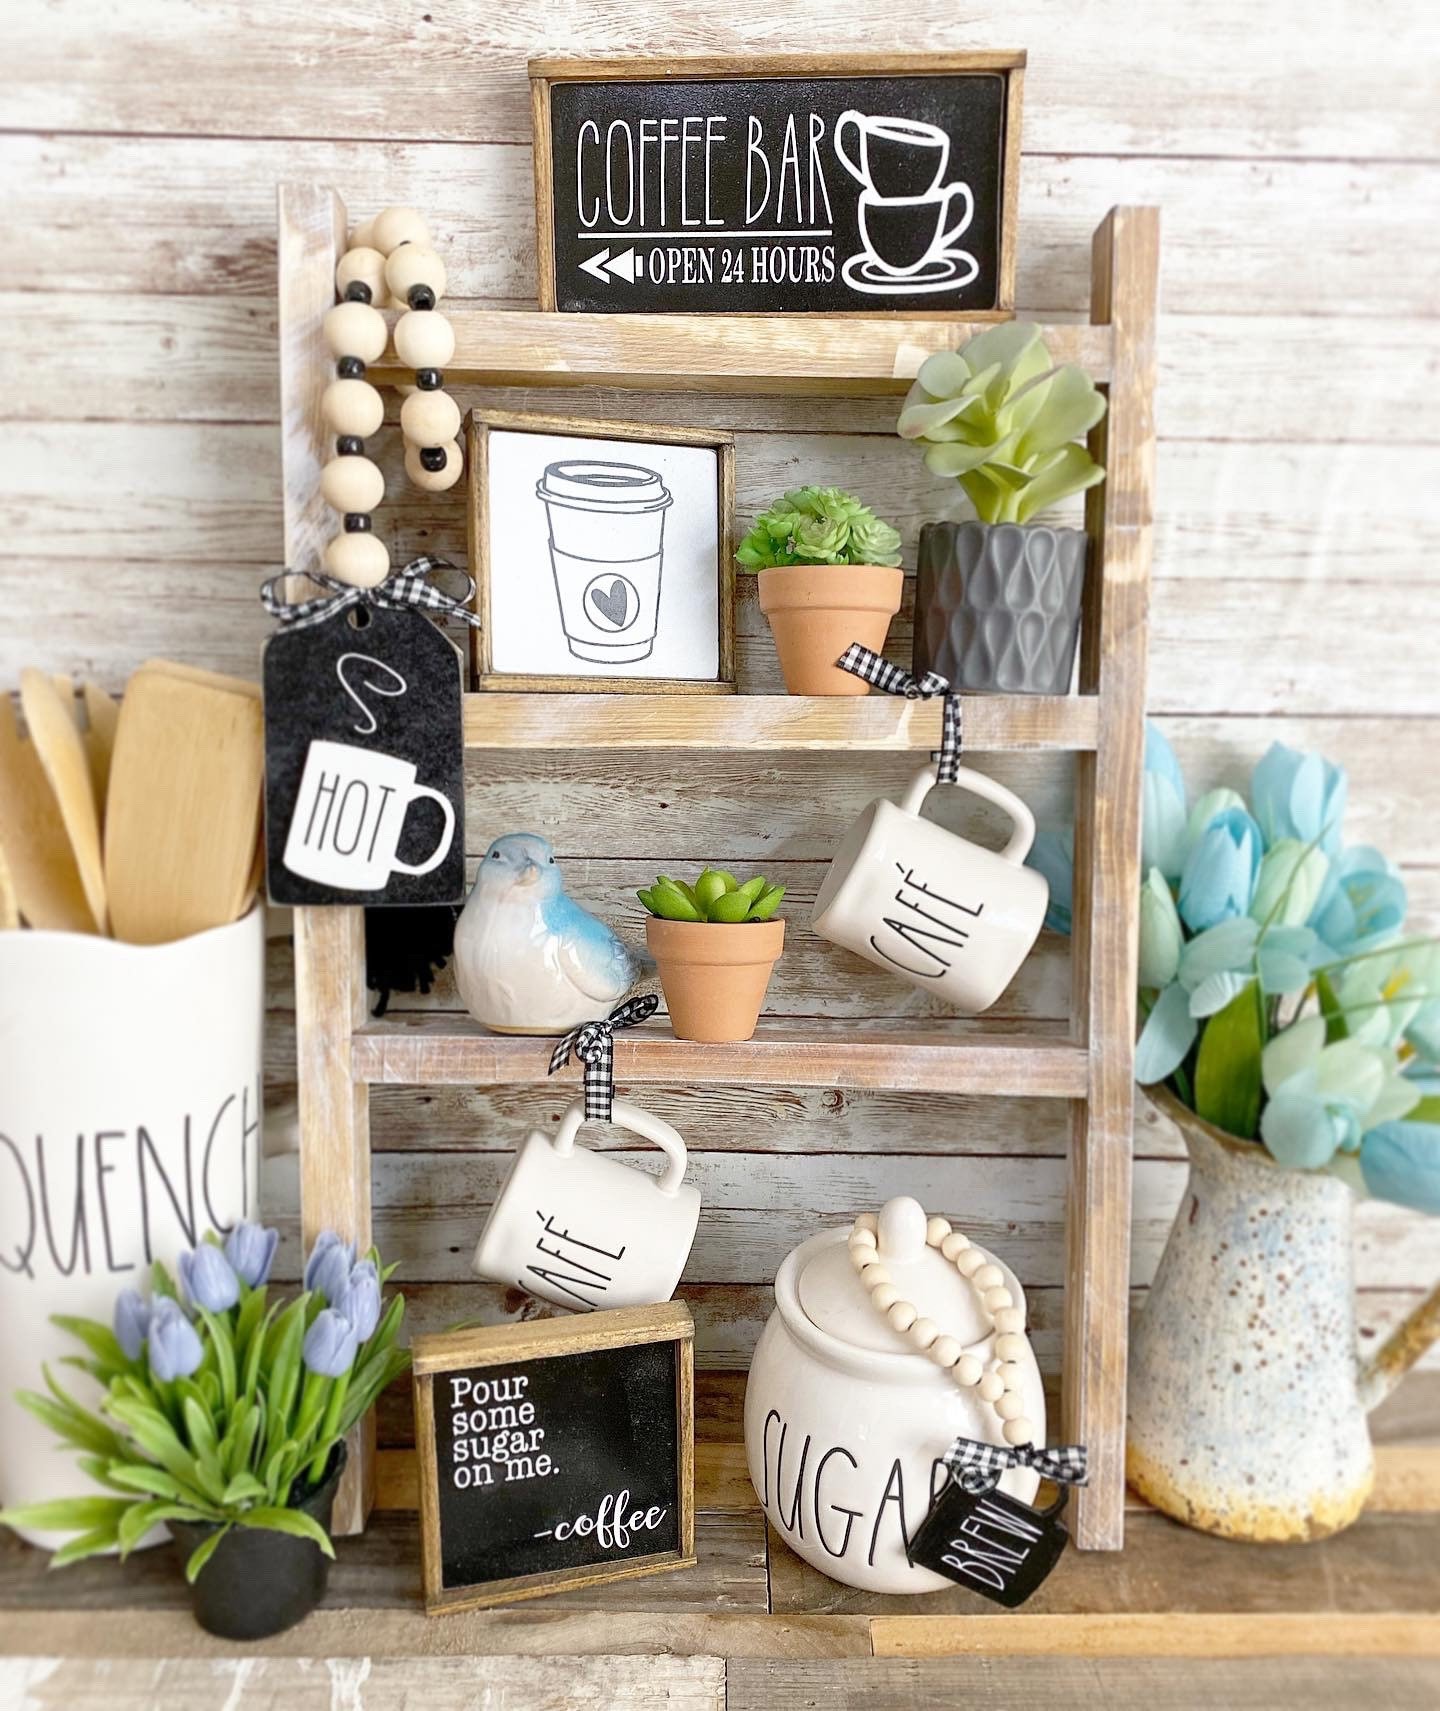 Coffee Bar Decor, Black & White Tiered Tray Items Mix and Match